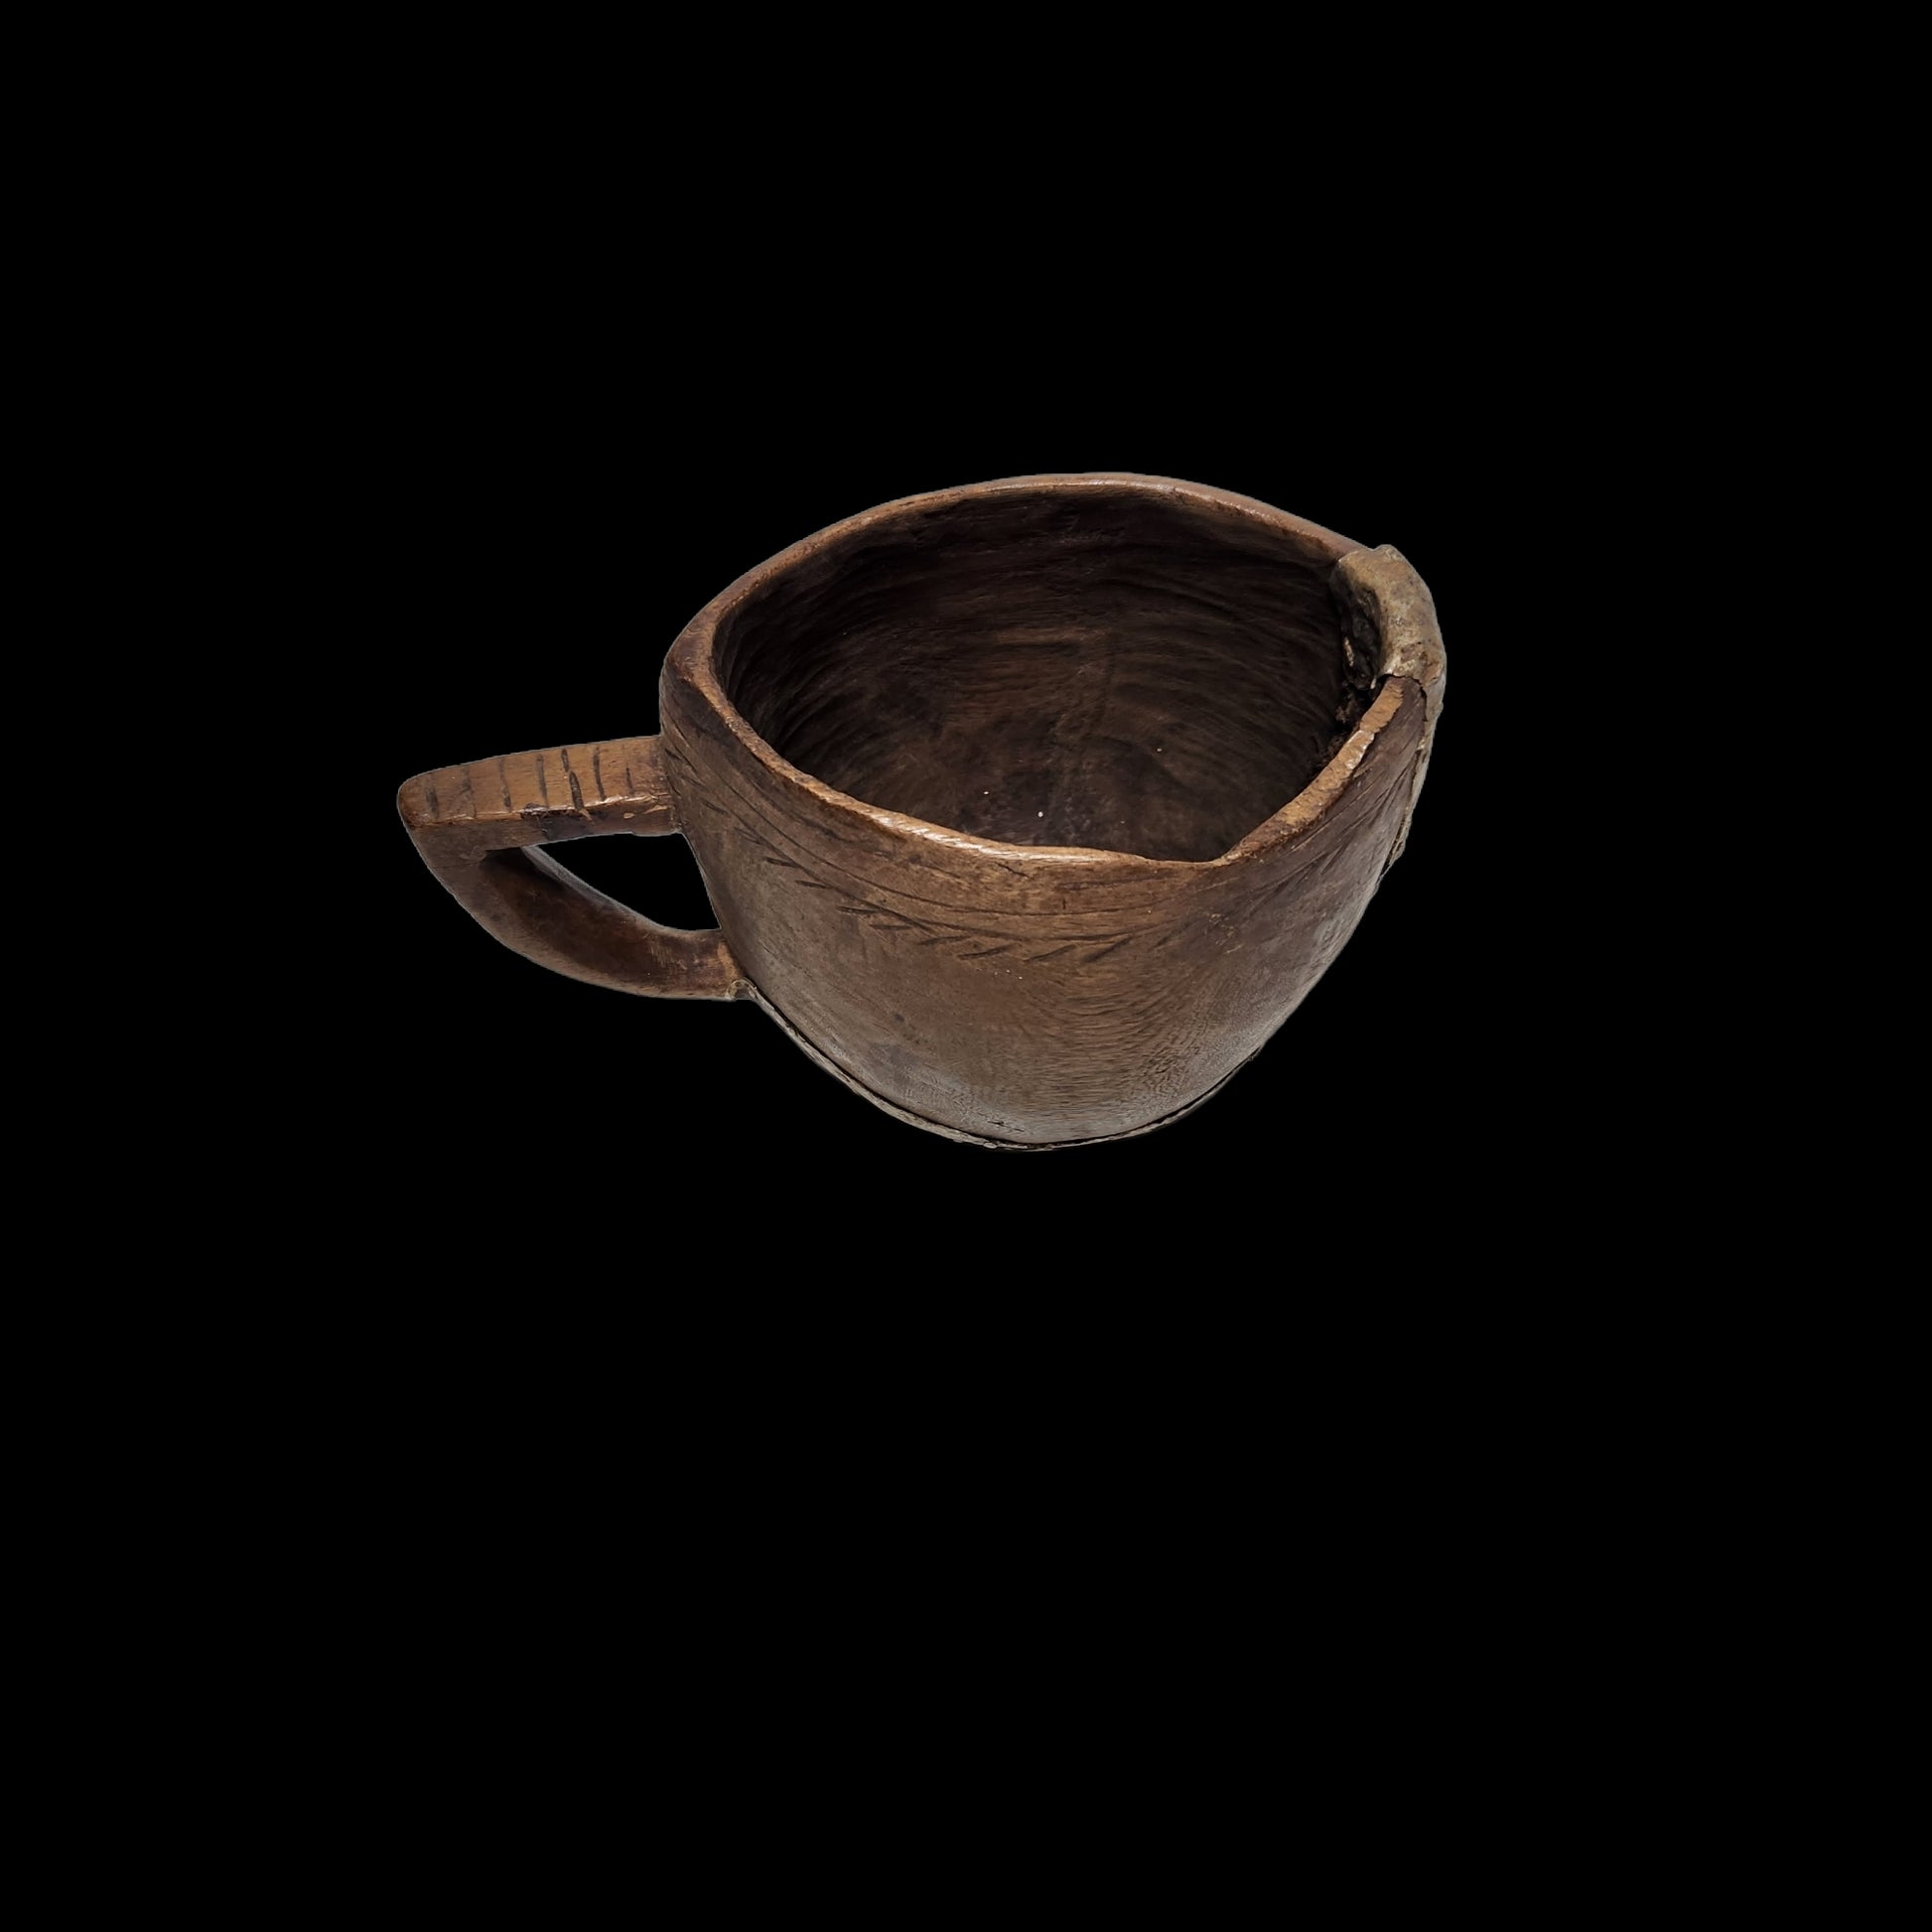 Cup - MD African Art